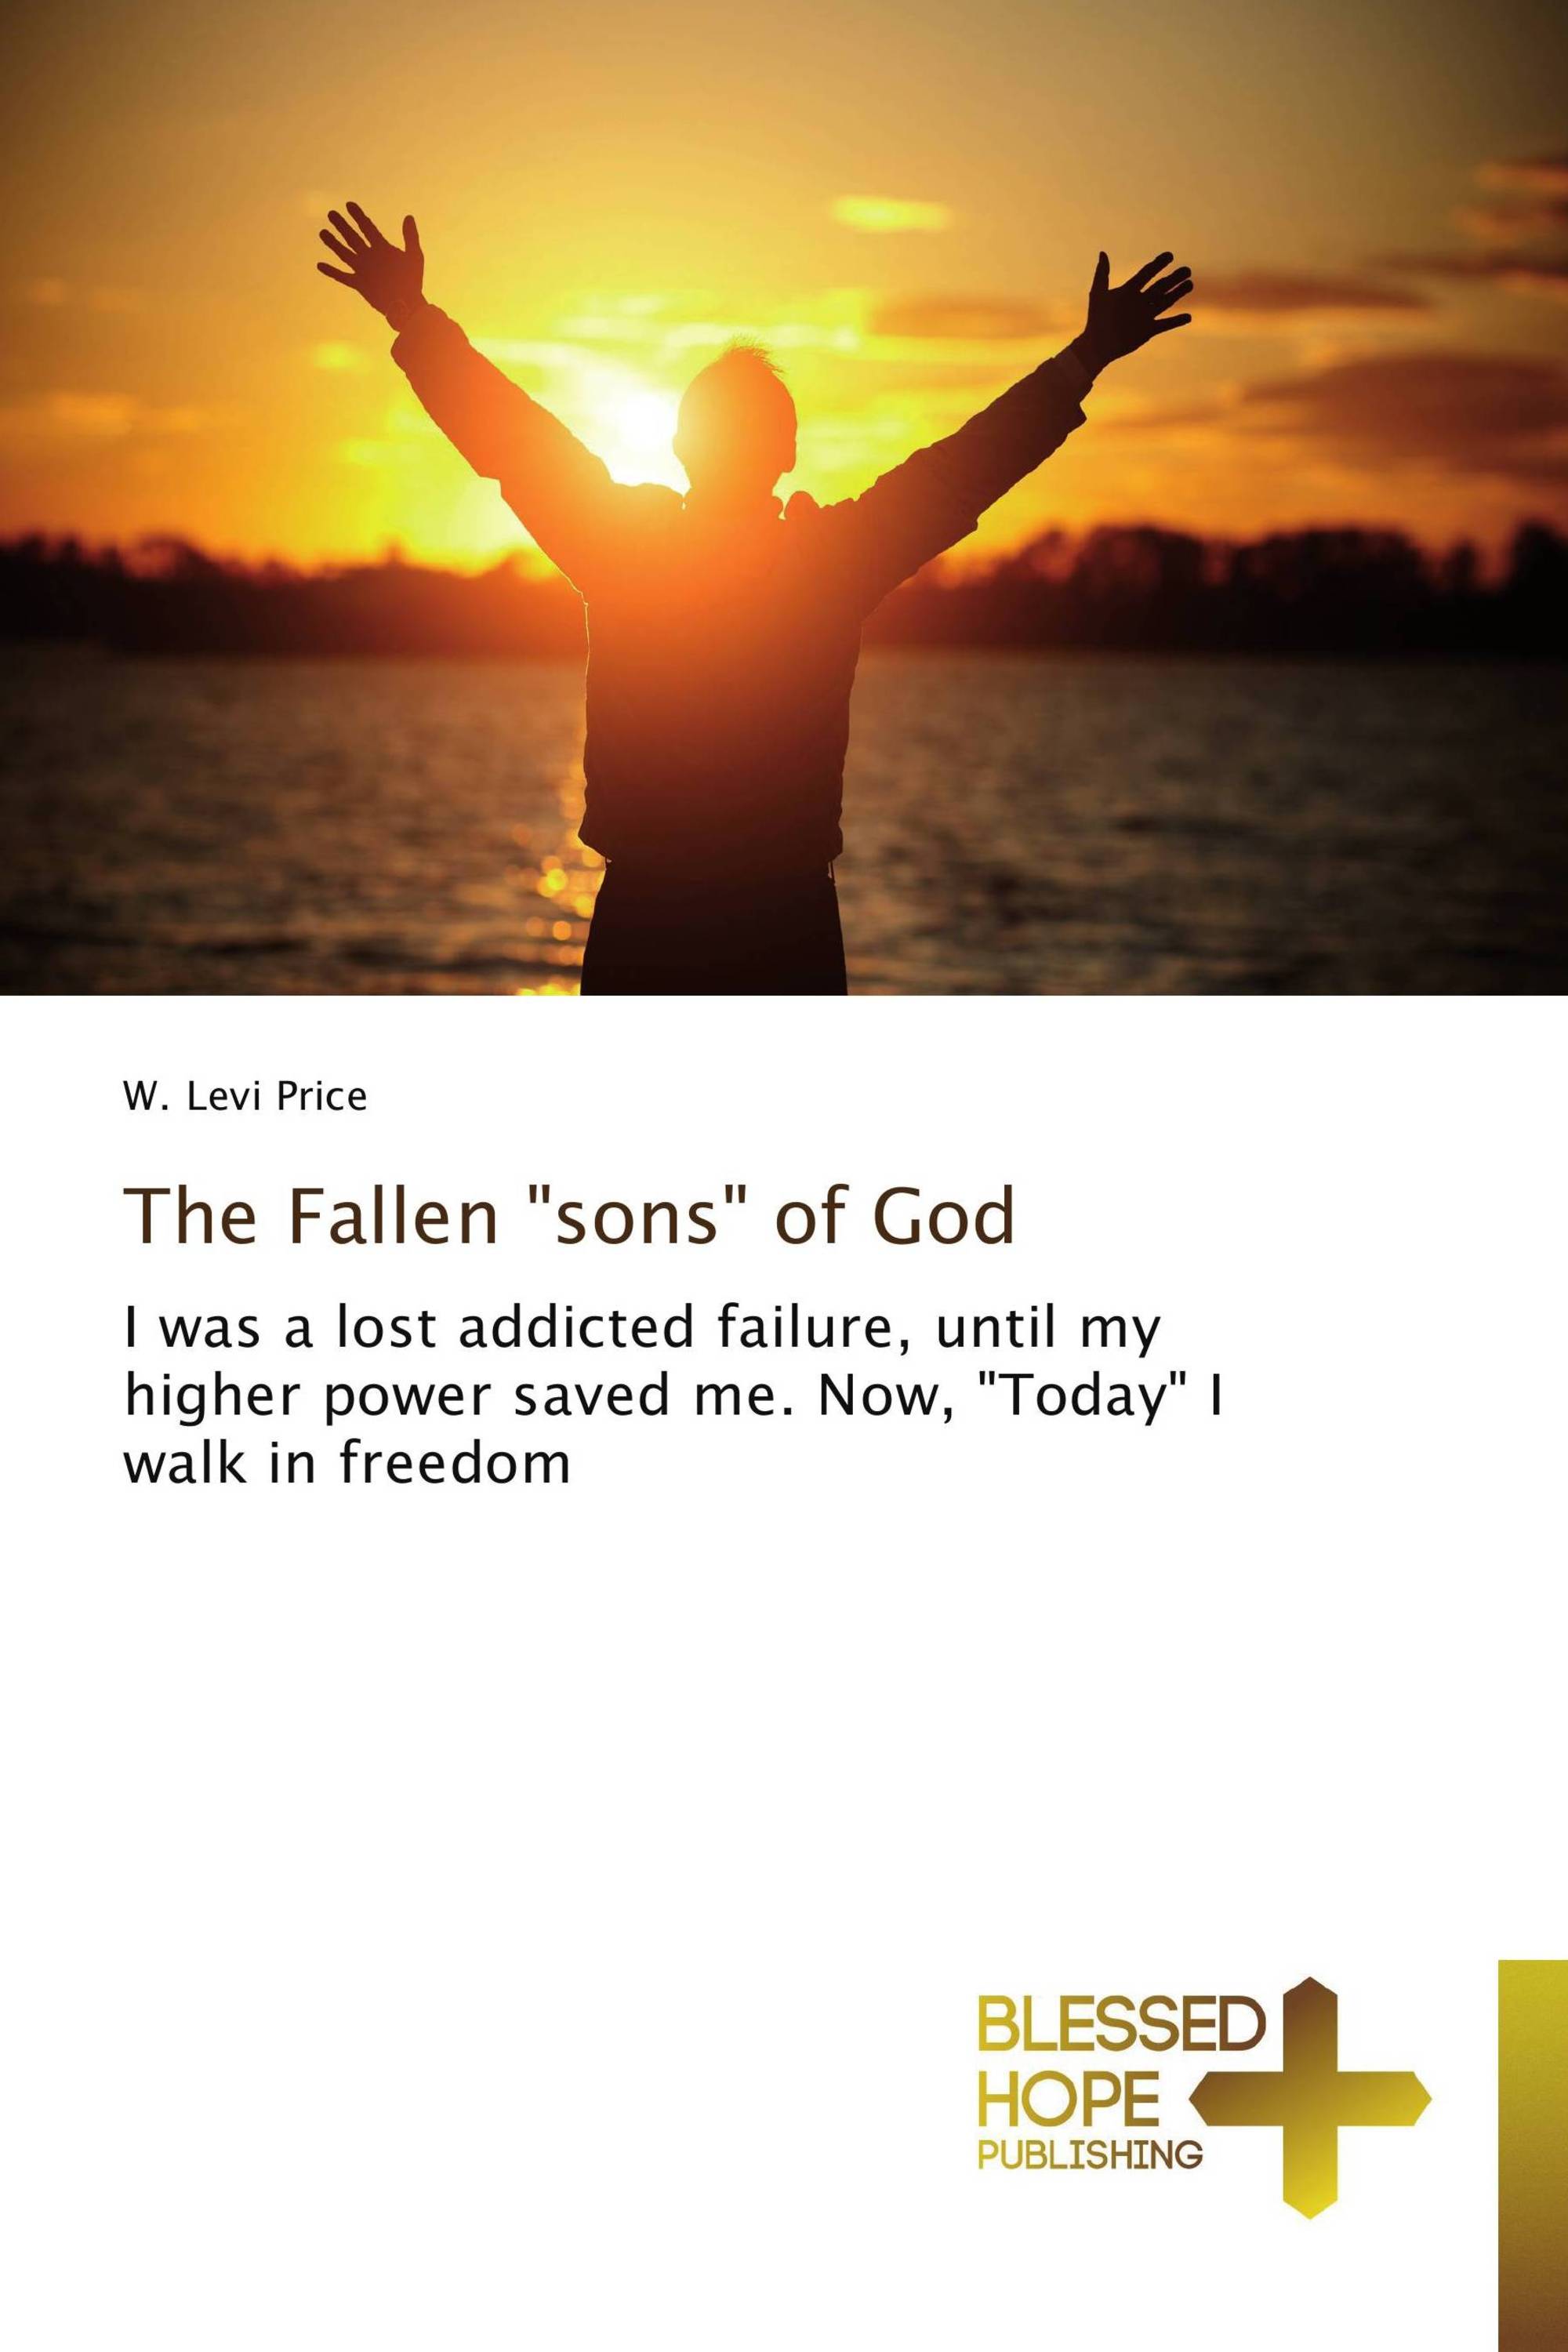 The Fallen "sons" of God